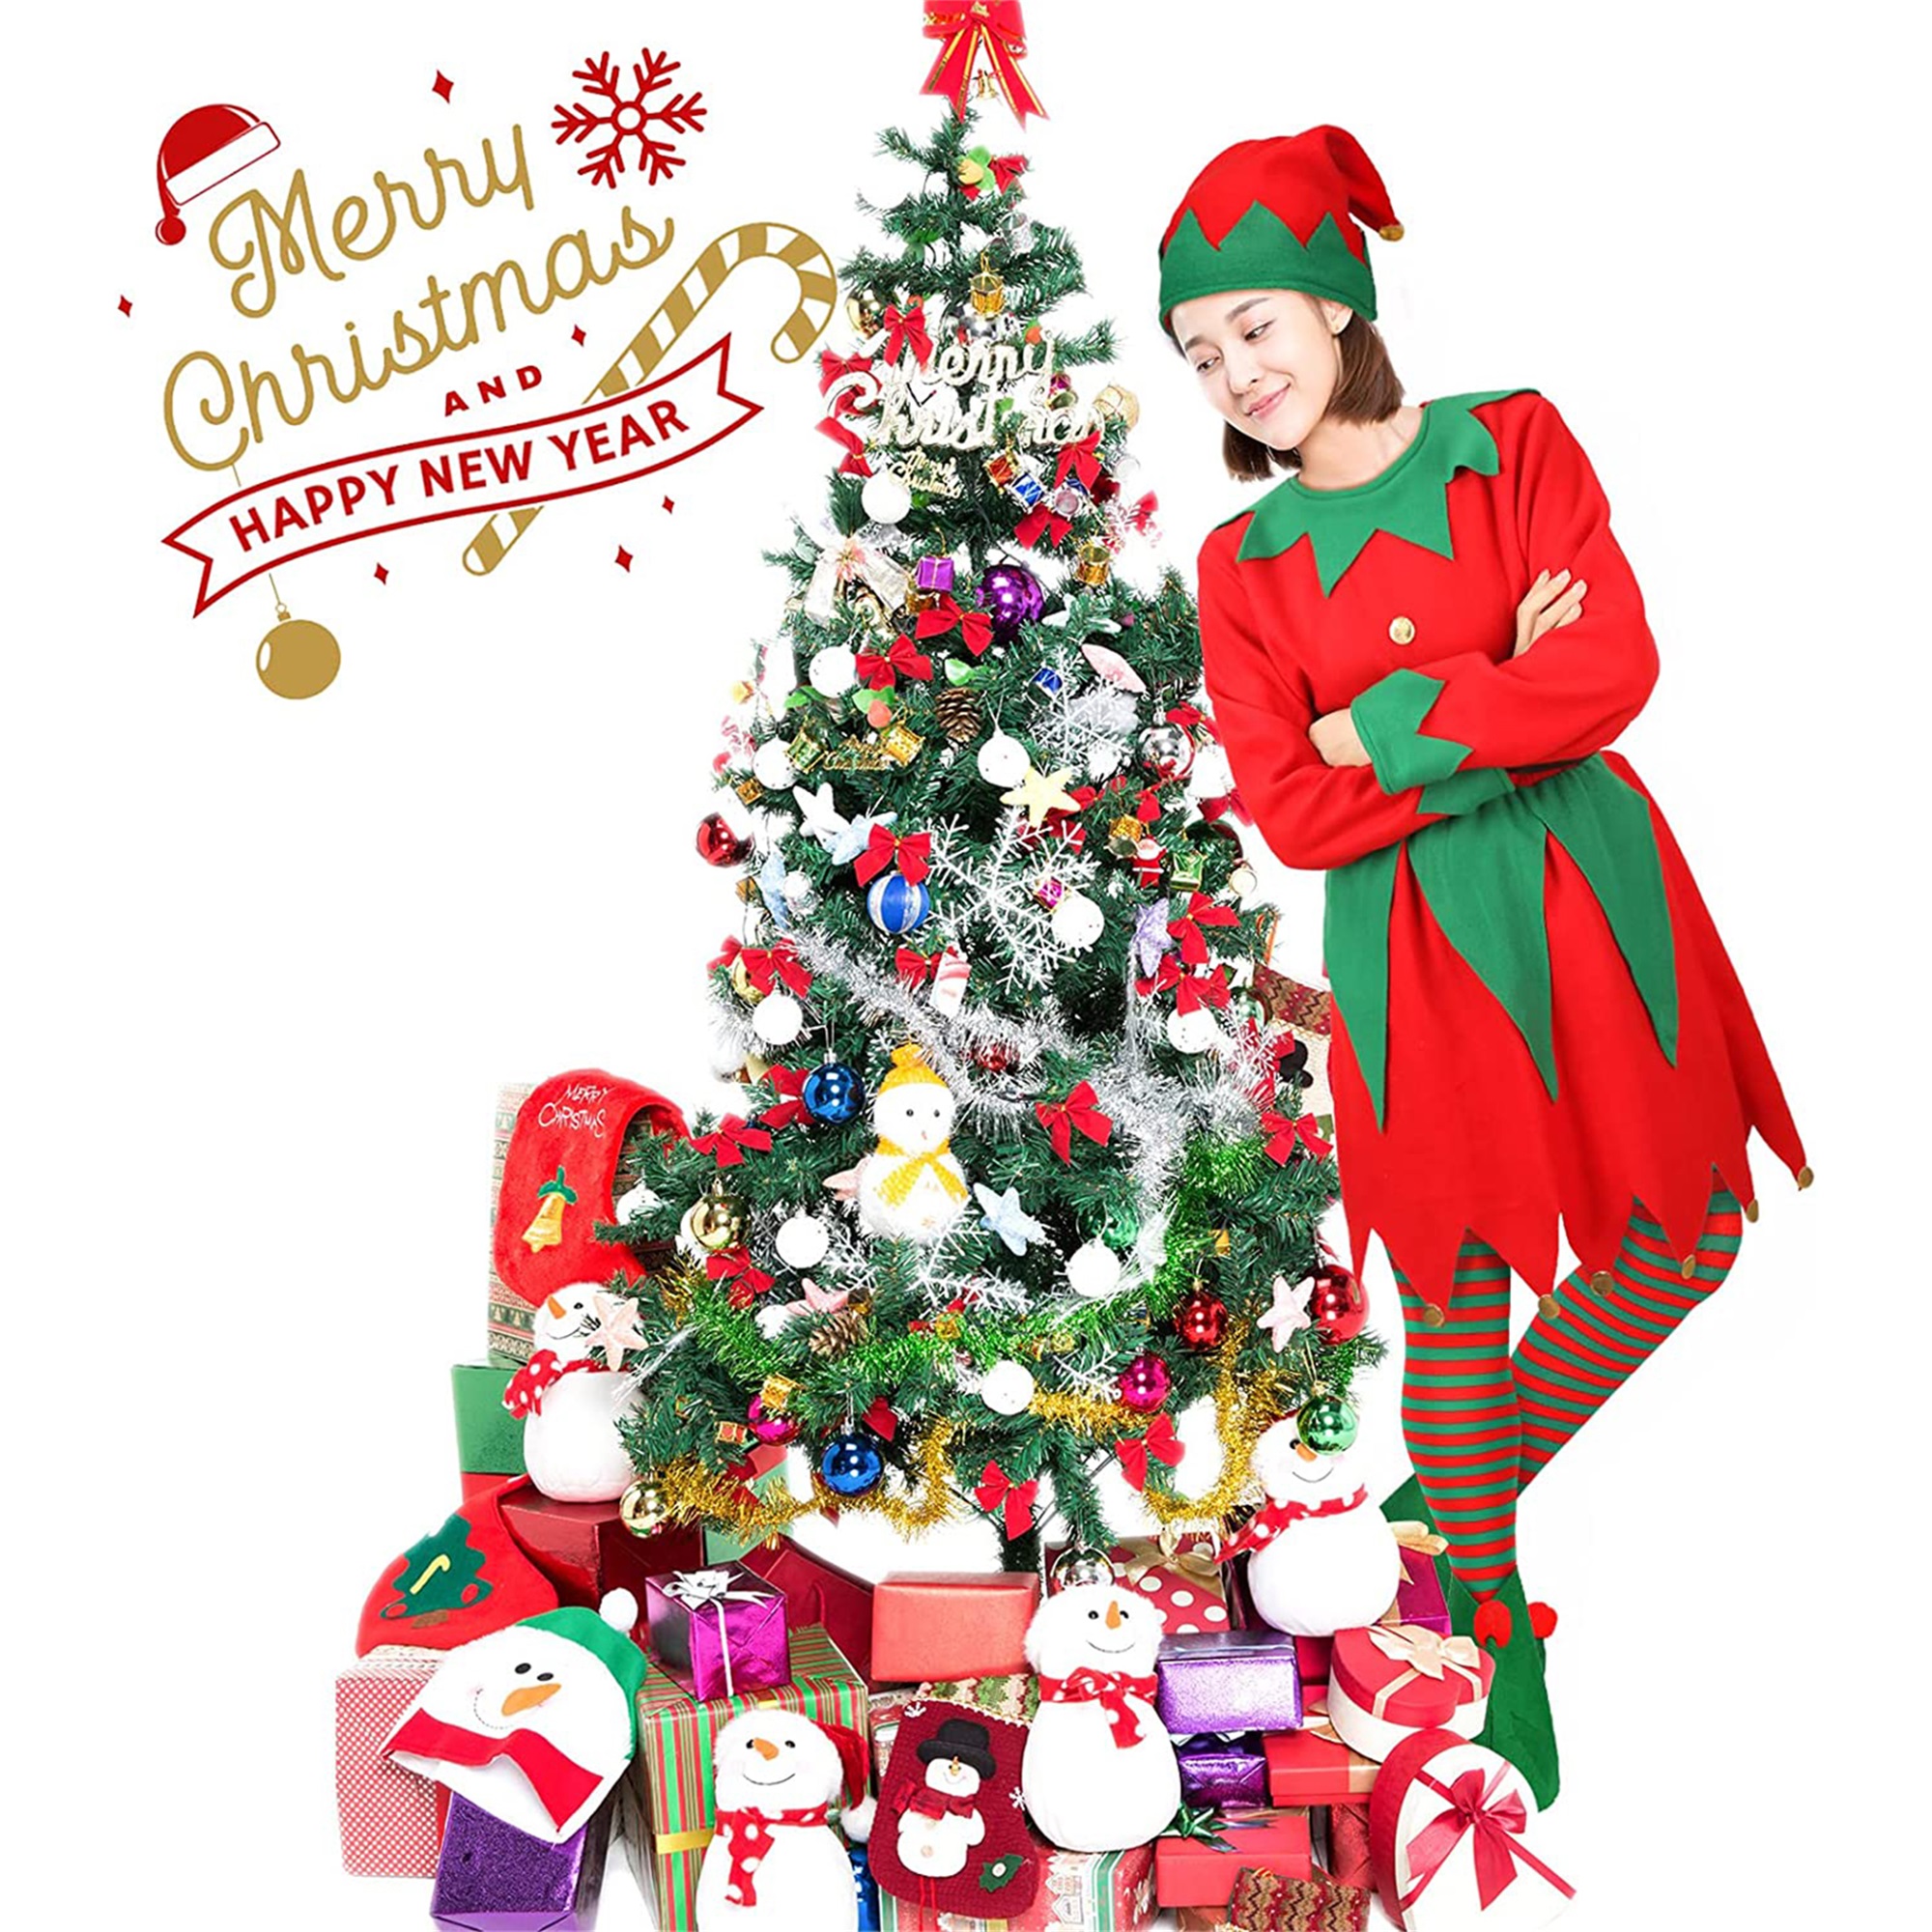 Douhoow Women Christmas Elf Girl Costume, Long Sleeve Dress+Hat+Shoes+Striped Stockings - image 4 of 9